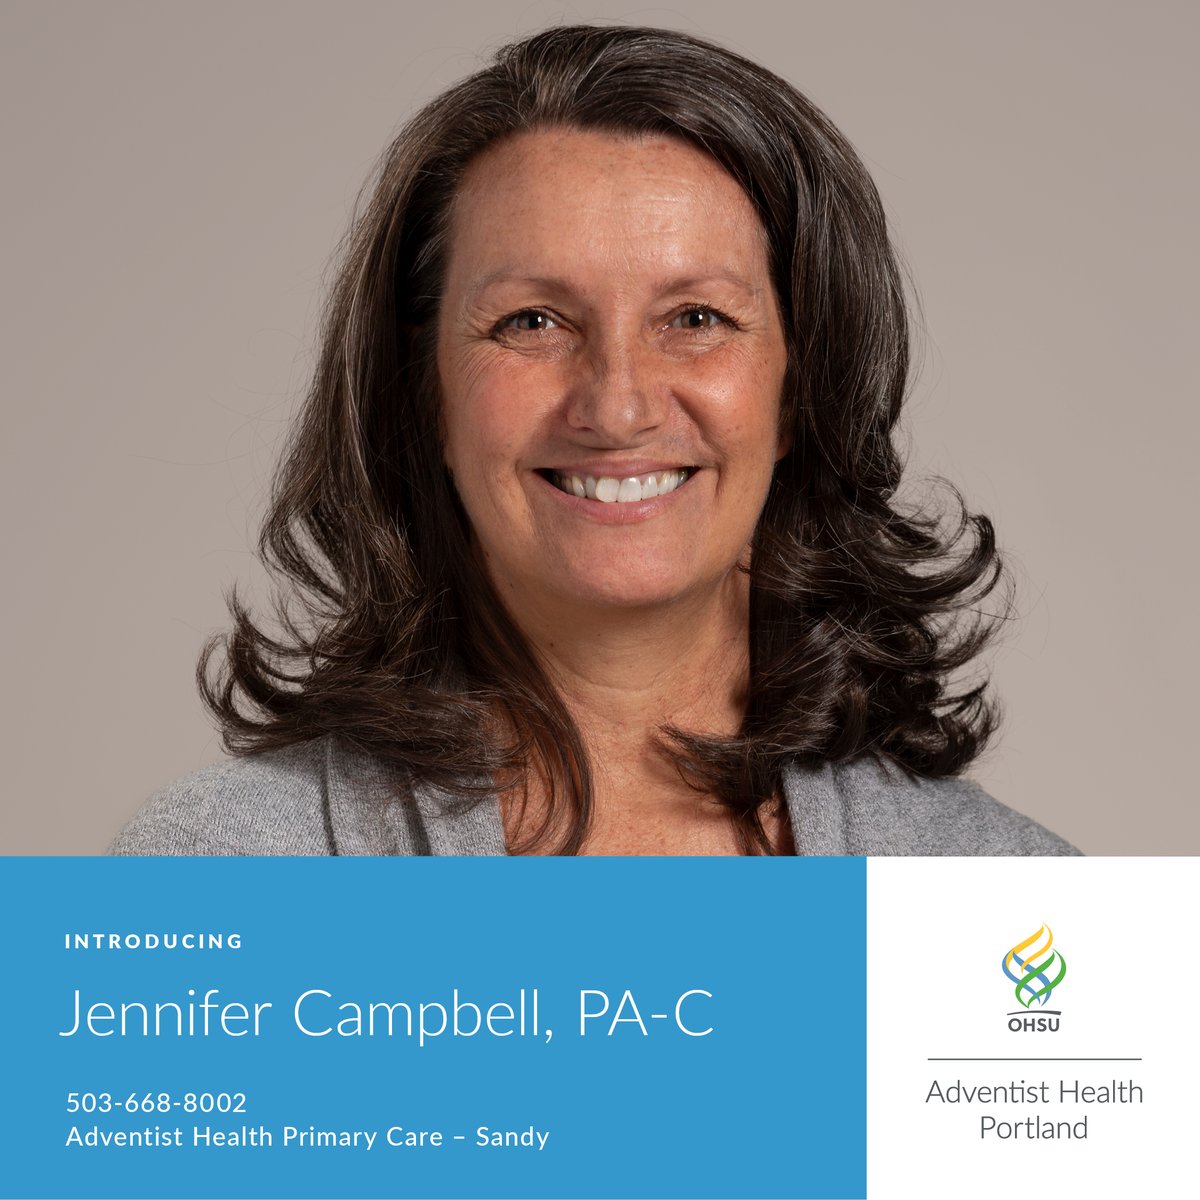 Certified physician assistant Jennifer Campbell, PA-C, specializes in primary care. “I am fascinated by the human body and how it functions,” she says. “We don’t even have to think about it, and it provides us with this human experience we call life.” spr.ly/6012ZFoY4